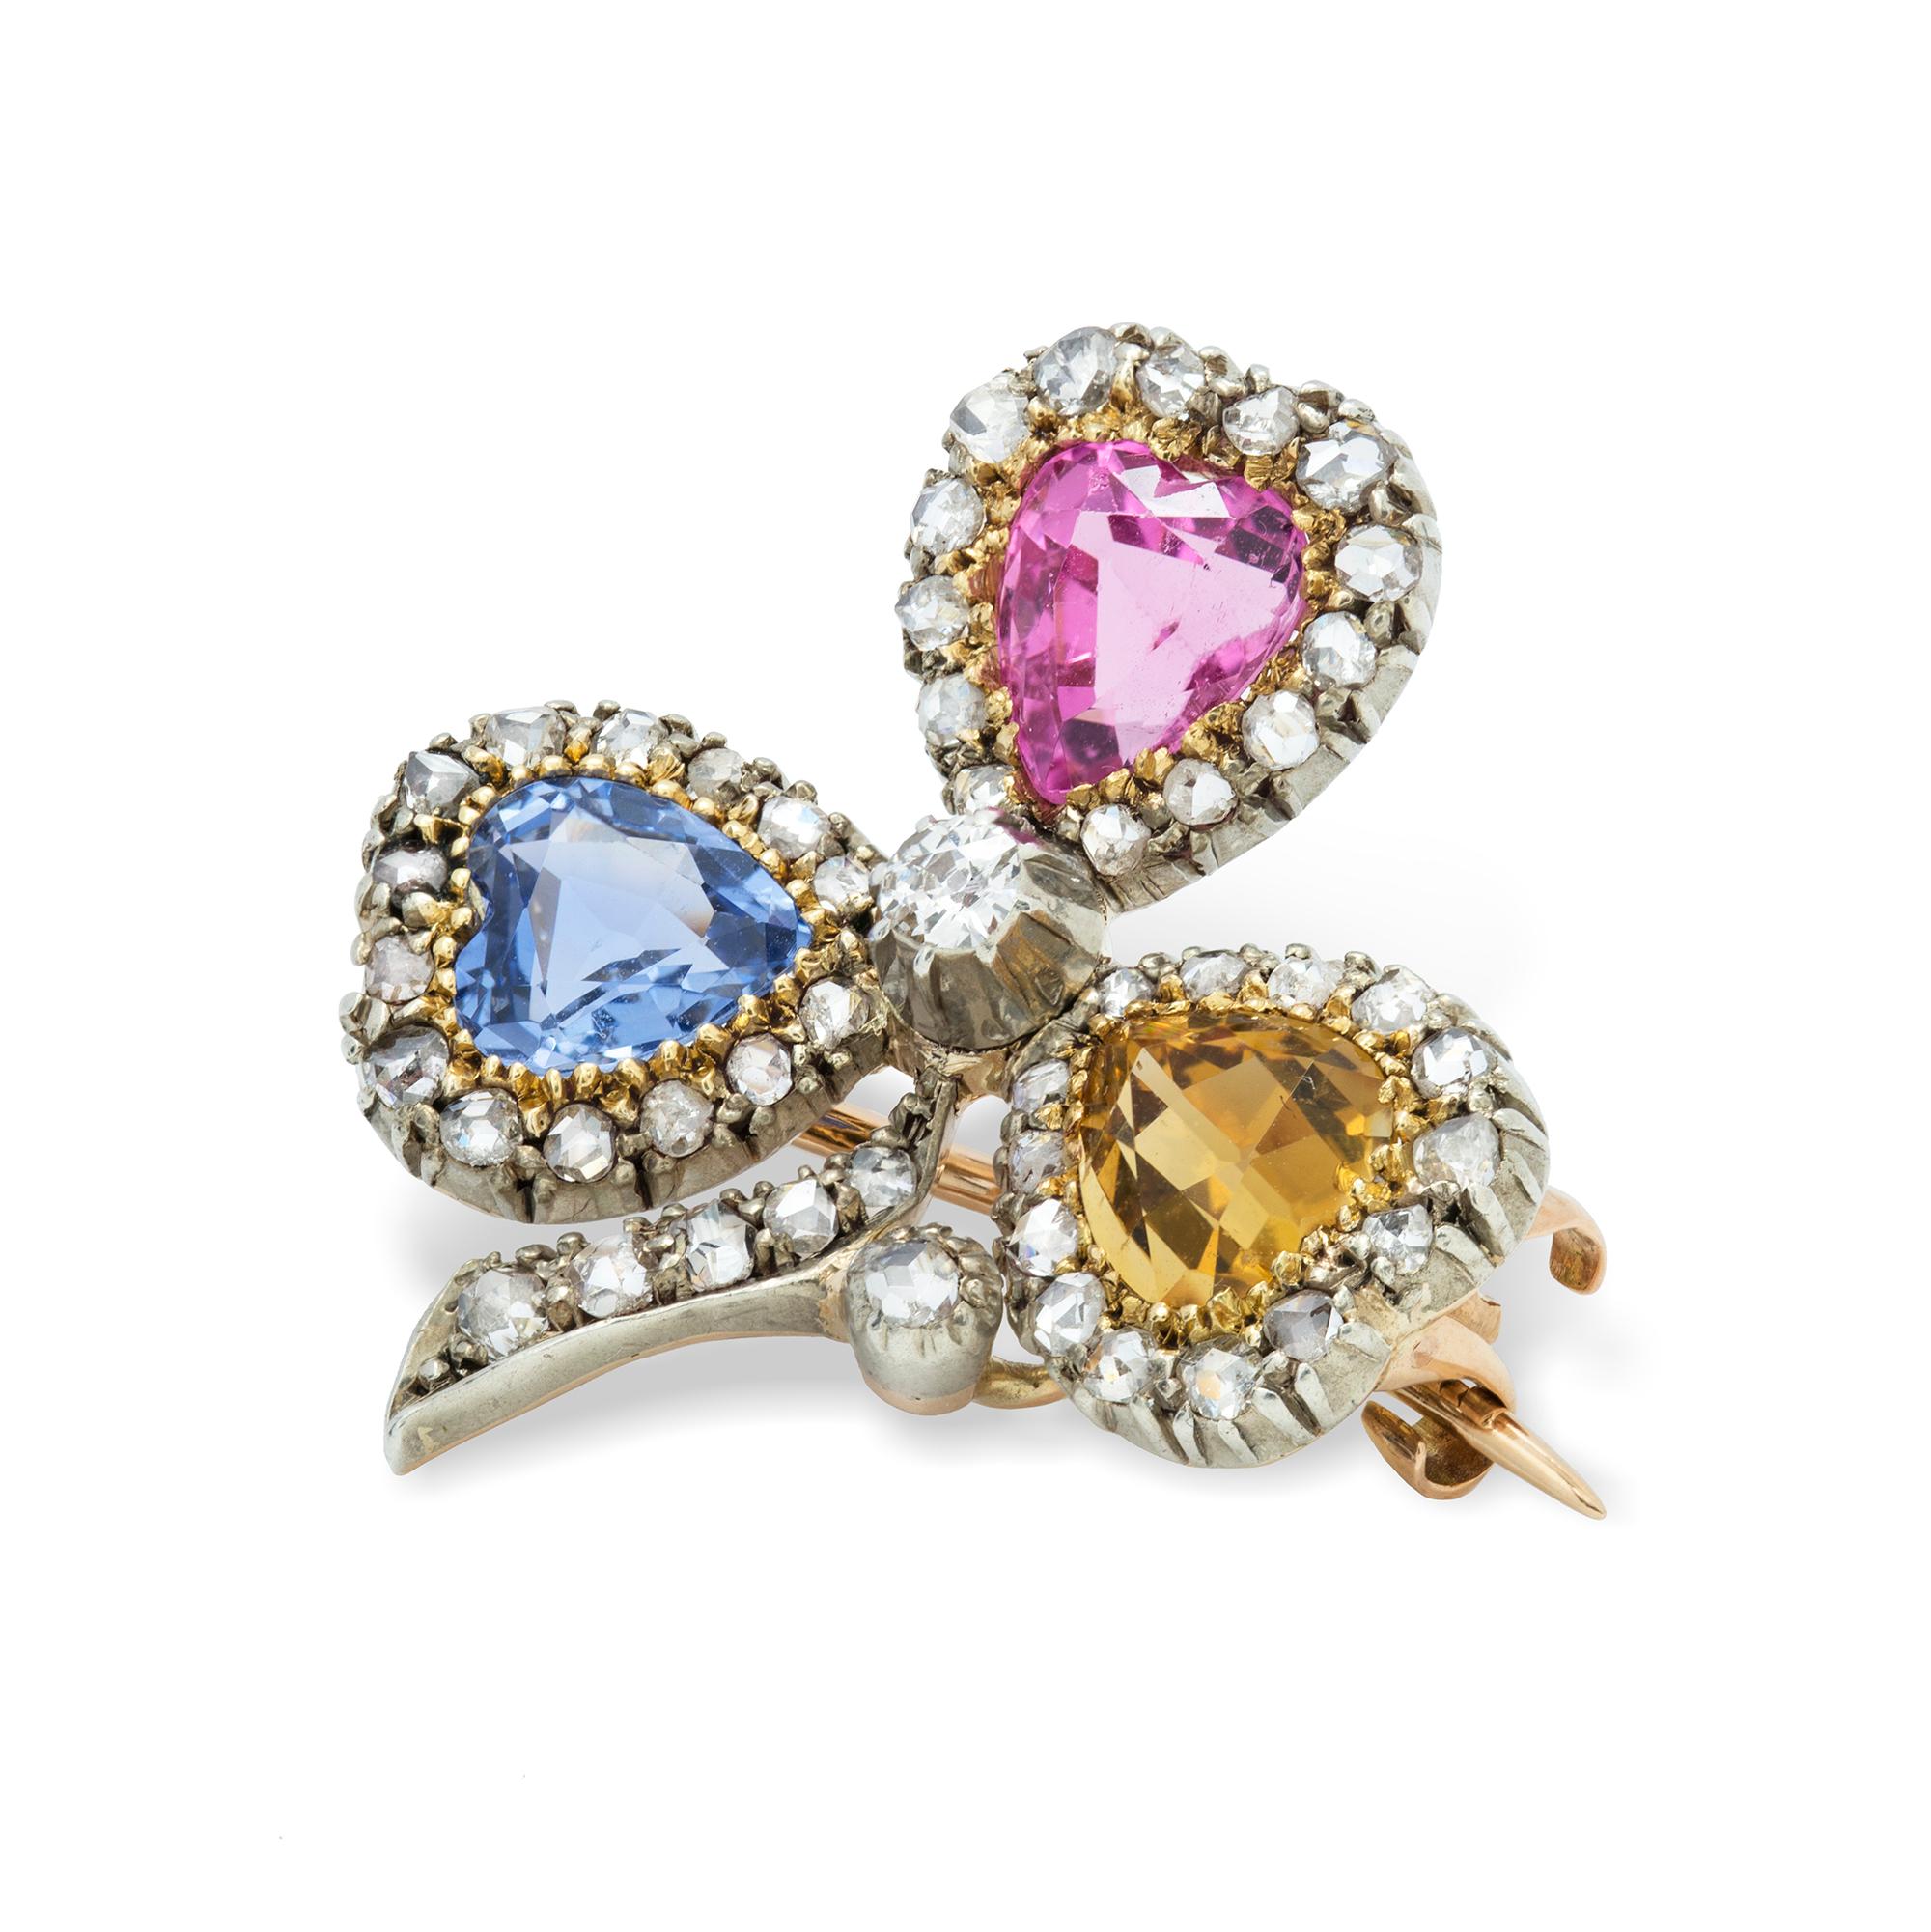 A late Victorian multi-colour gem and diamond clover leaf brooch, the three leaves each set with a heart-shaped faceted stone, one pale blue sapphire, one pink tourmaline and one golden citrine, each set to the centre of a cluster surround of